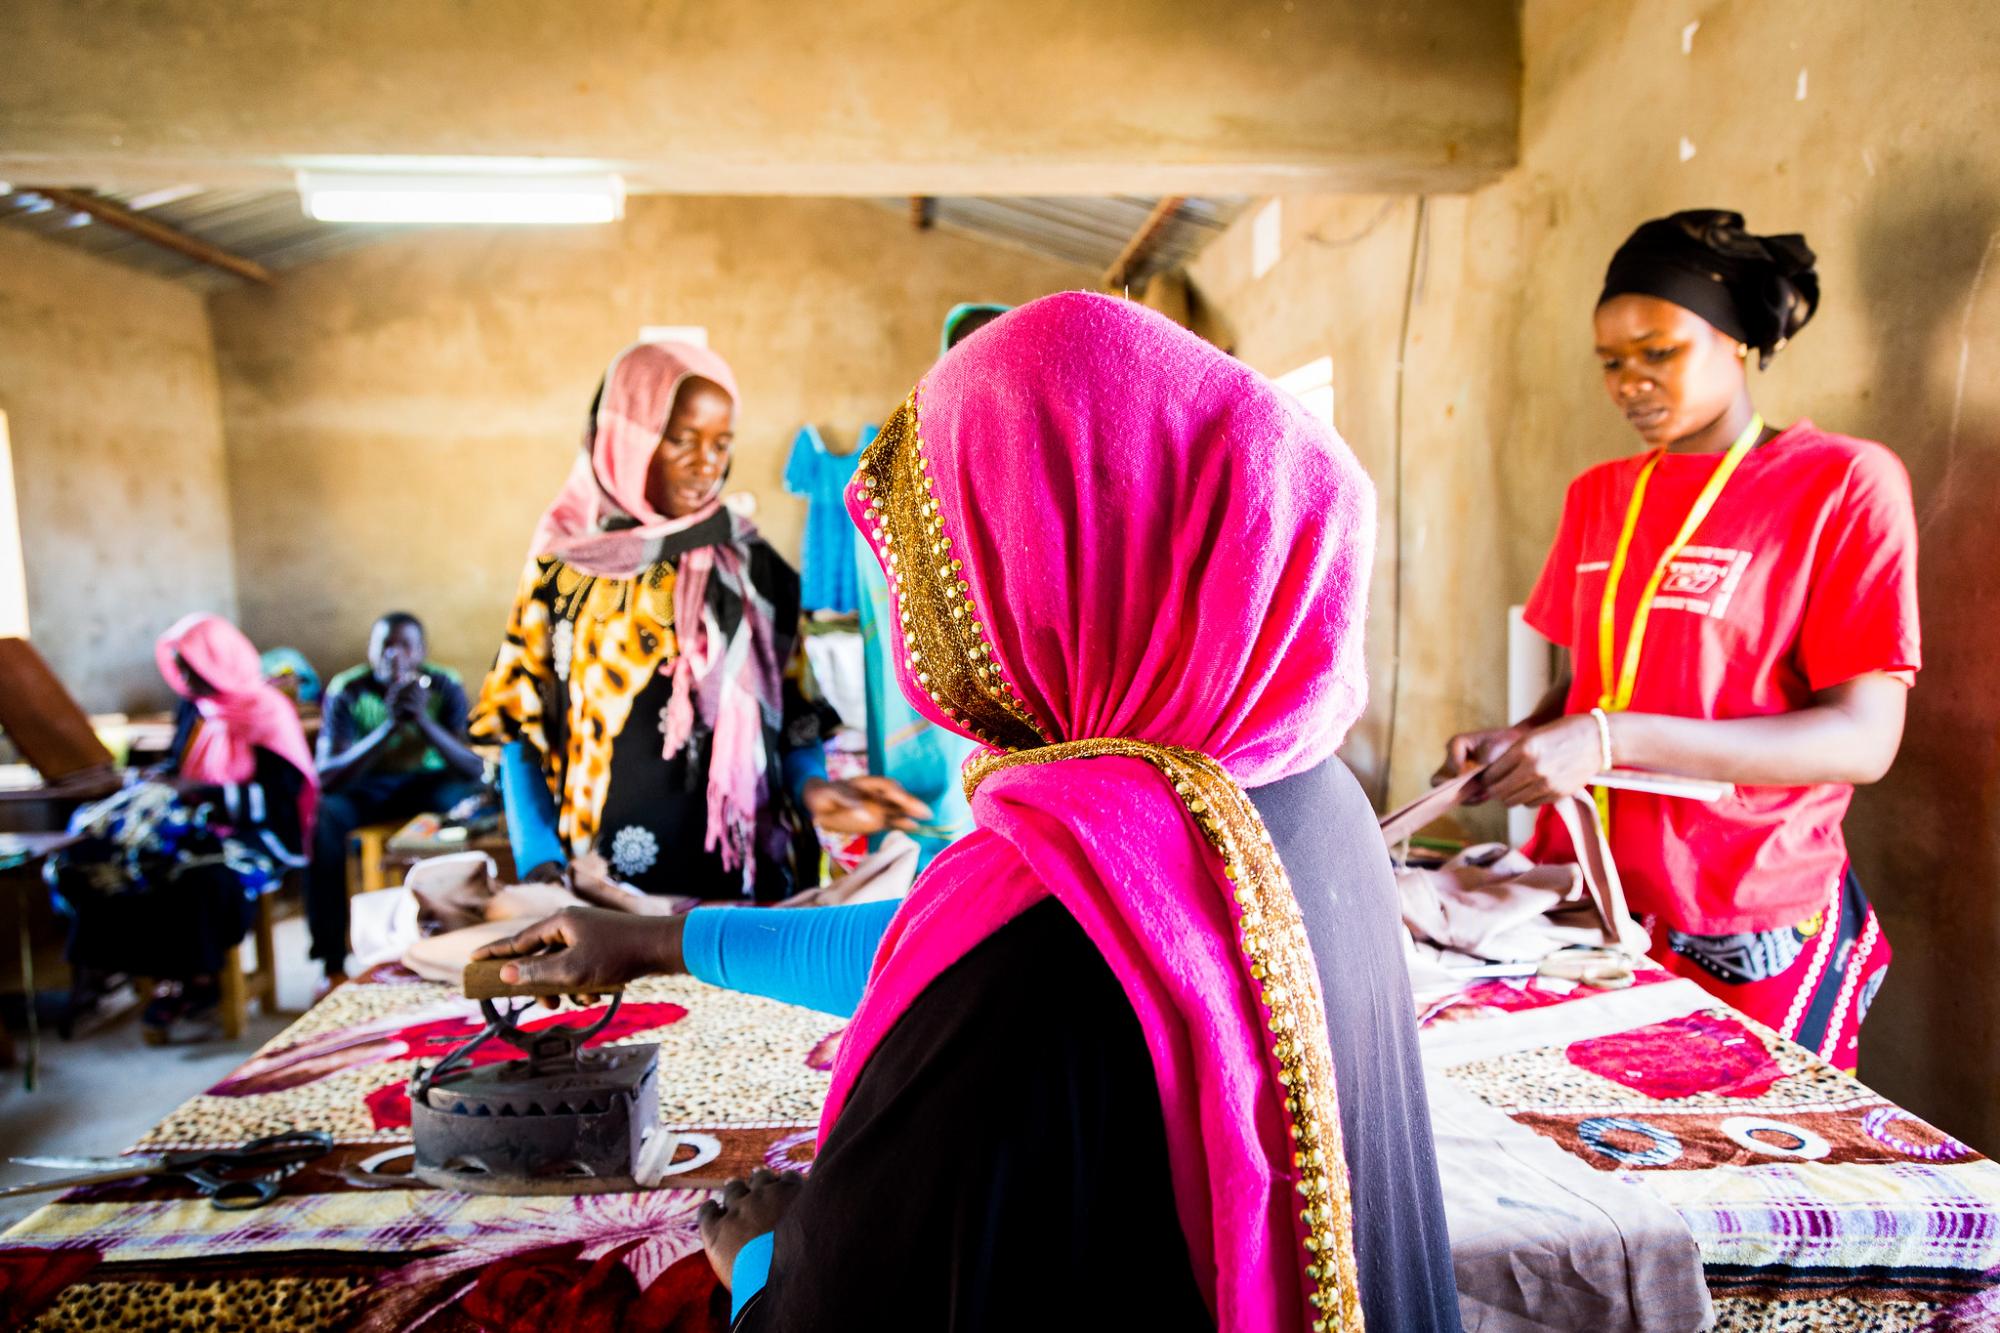 Sudanese refugees in Chad participate in vocational sewing training.